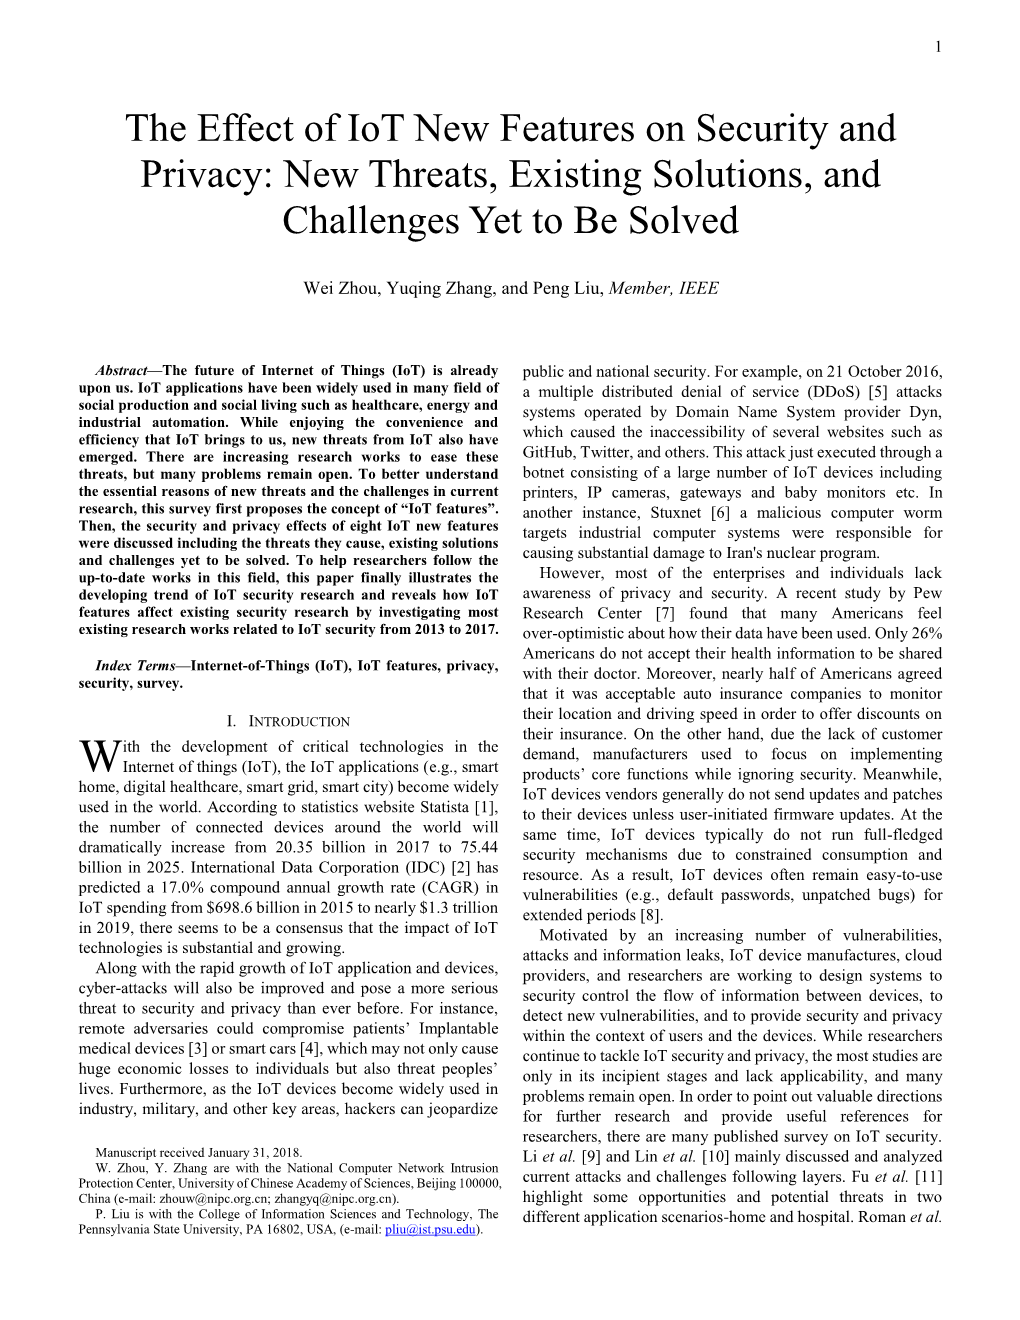 The Effect of Iot New Features on Security and Privacy: New Threats, Existing Solutions, and Challenges Yet to Be Solved